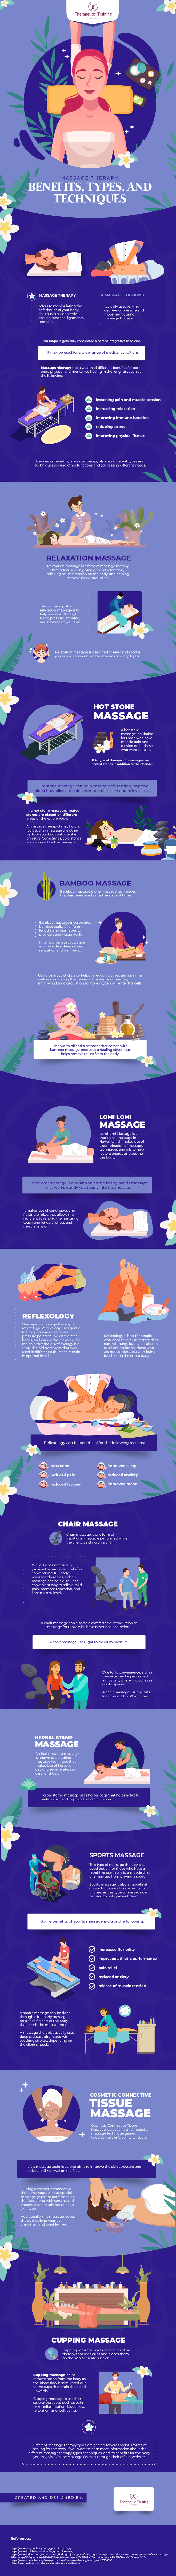 massage_therapy_benefits_infographic_image